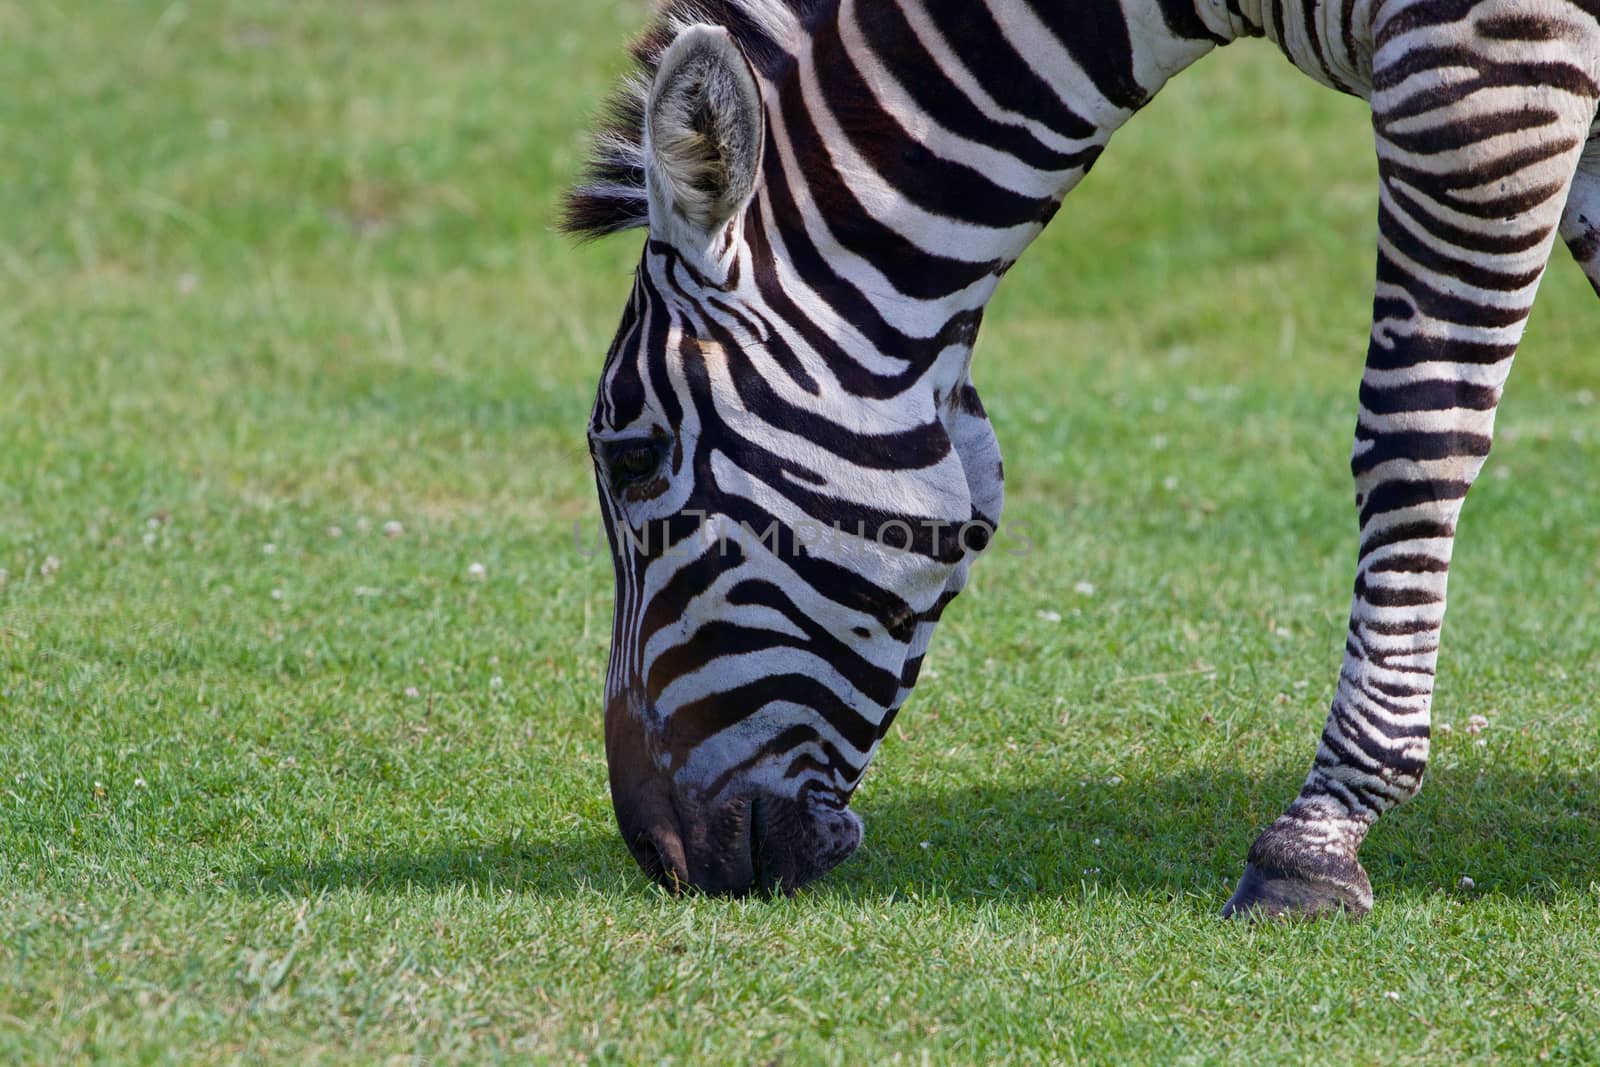 The zebra is eating the grass